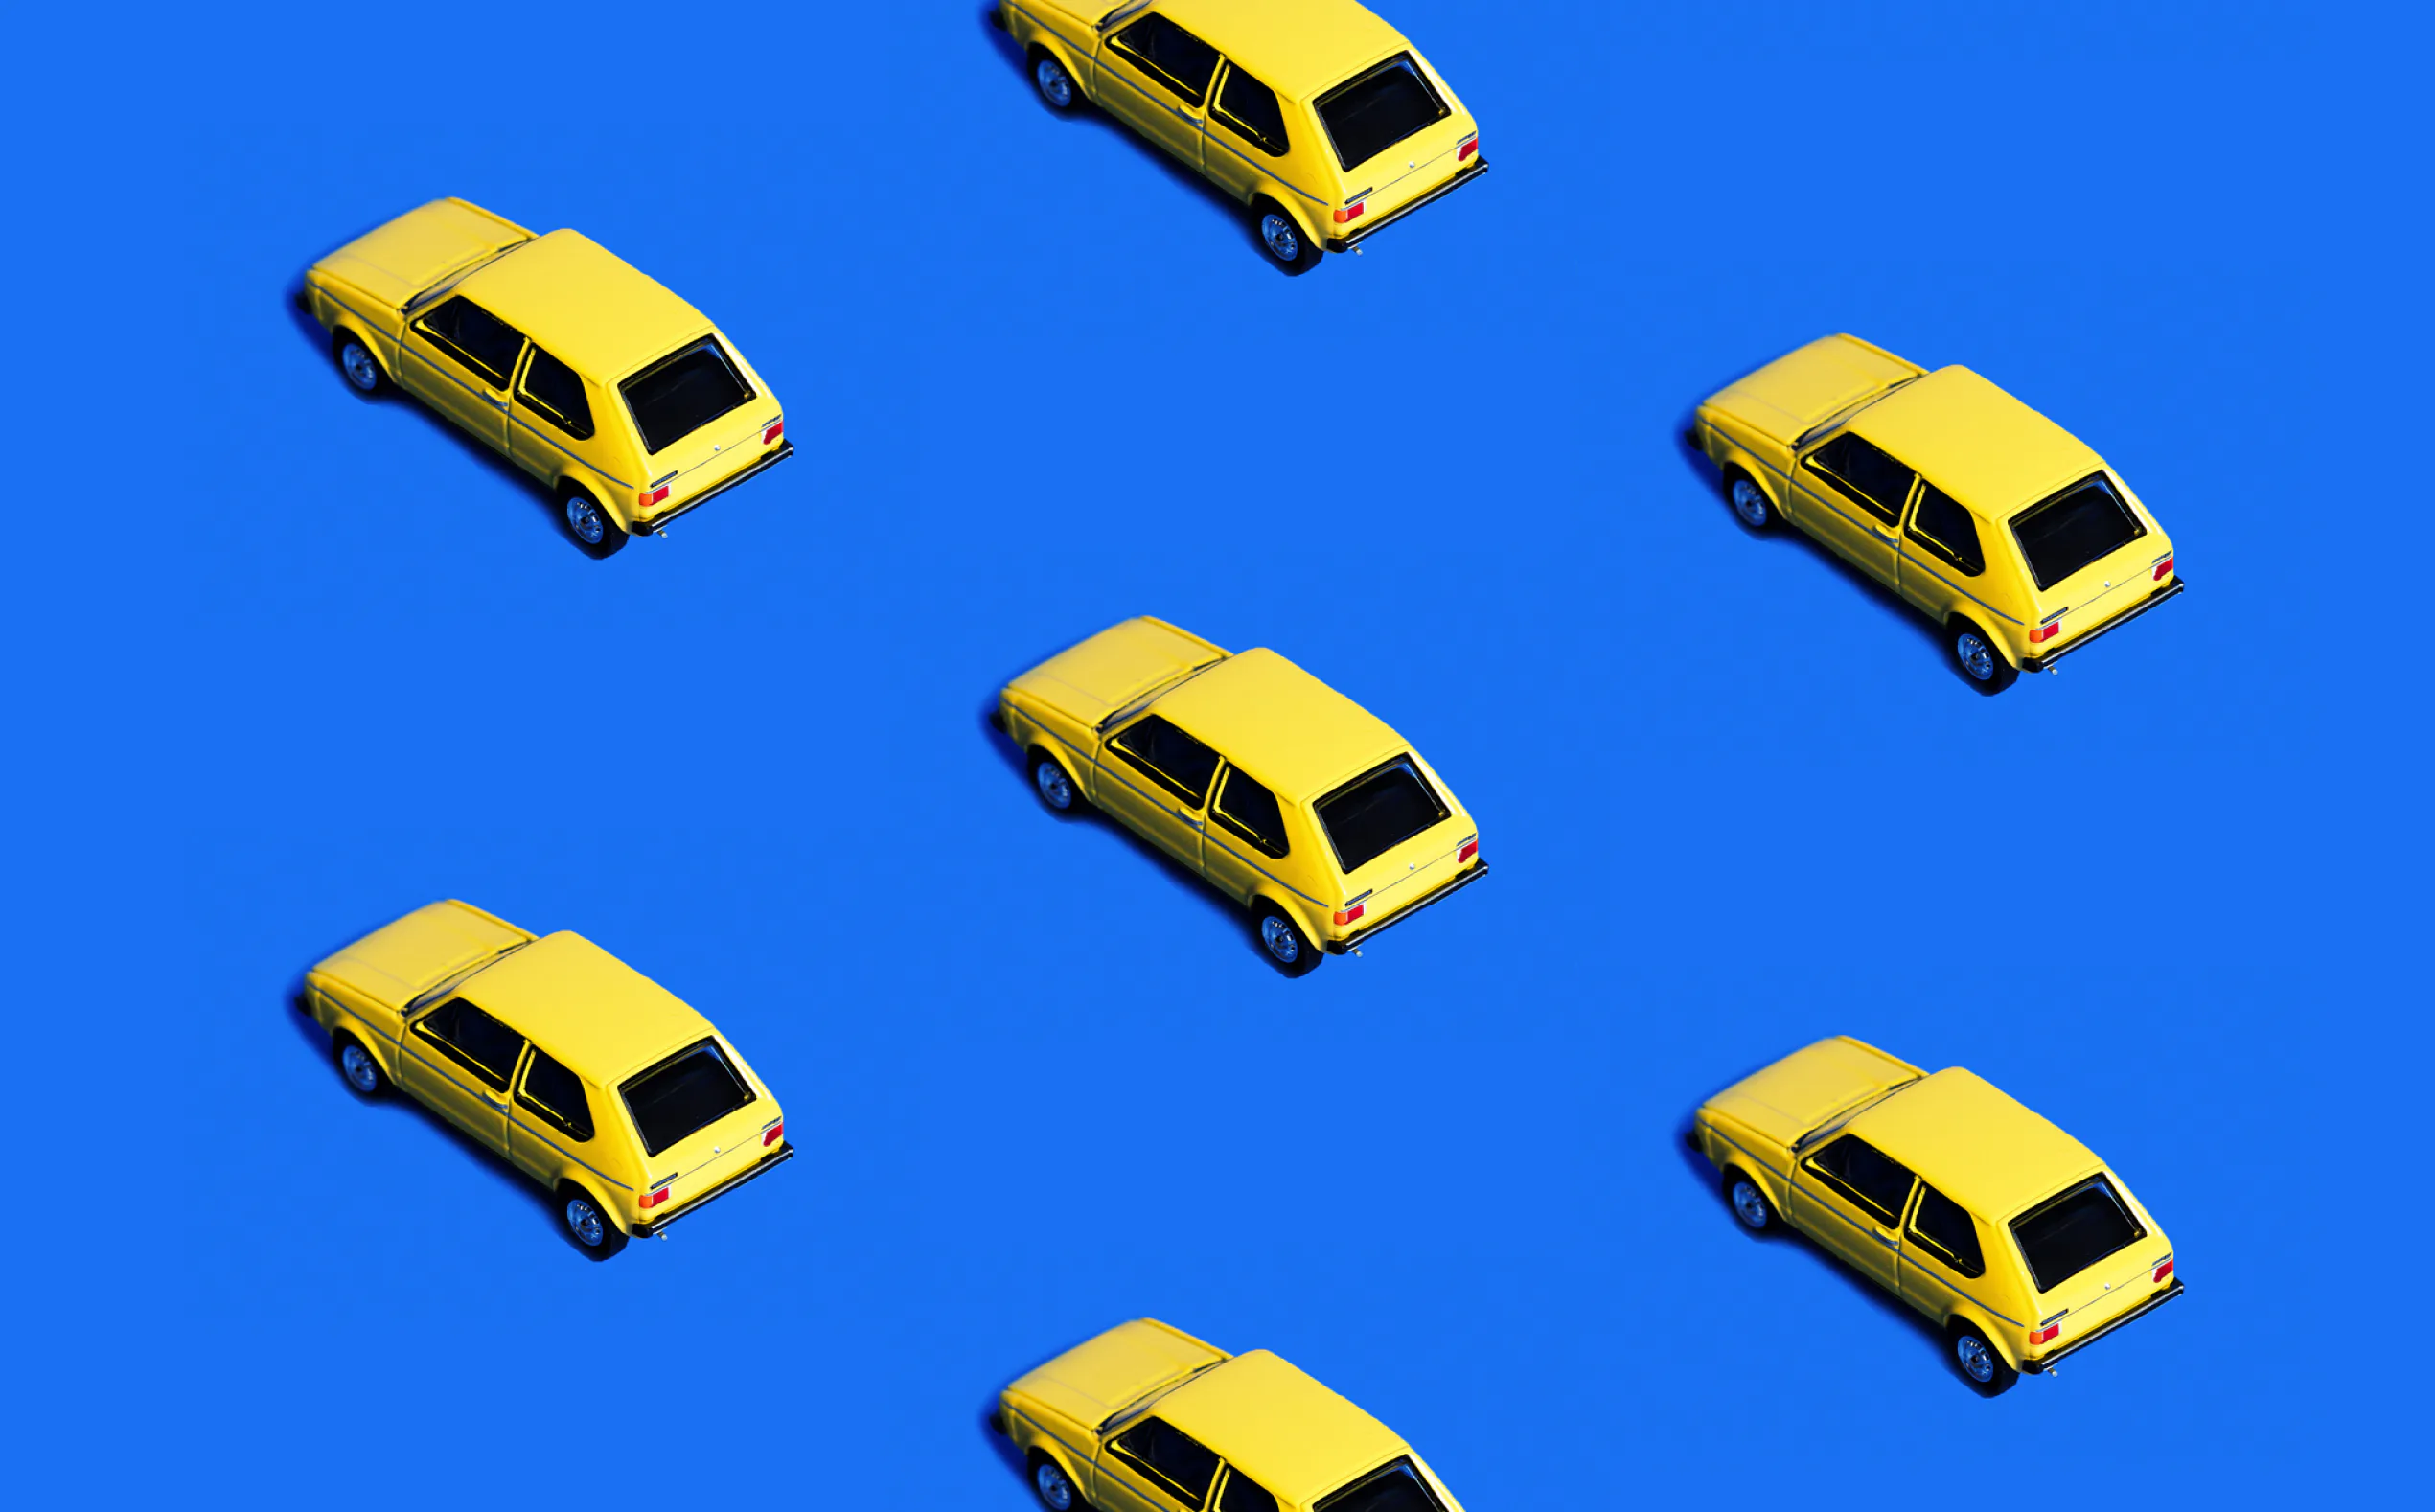 Repeating yellow cars on a blue background.